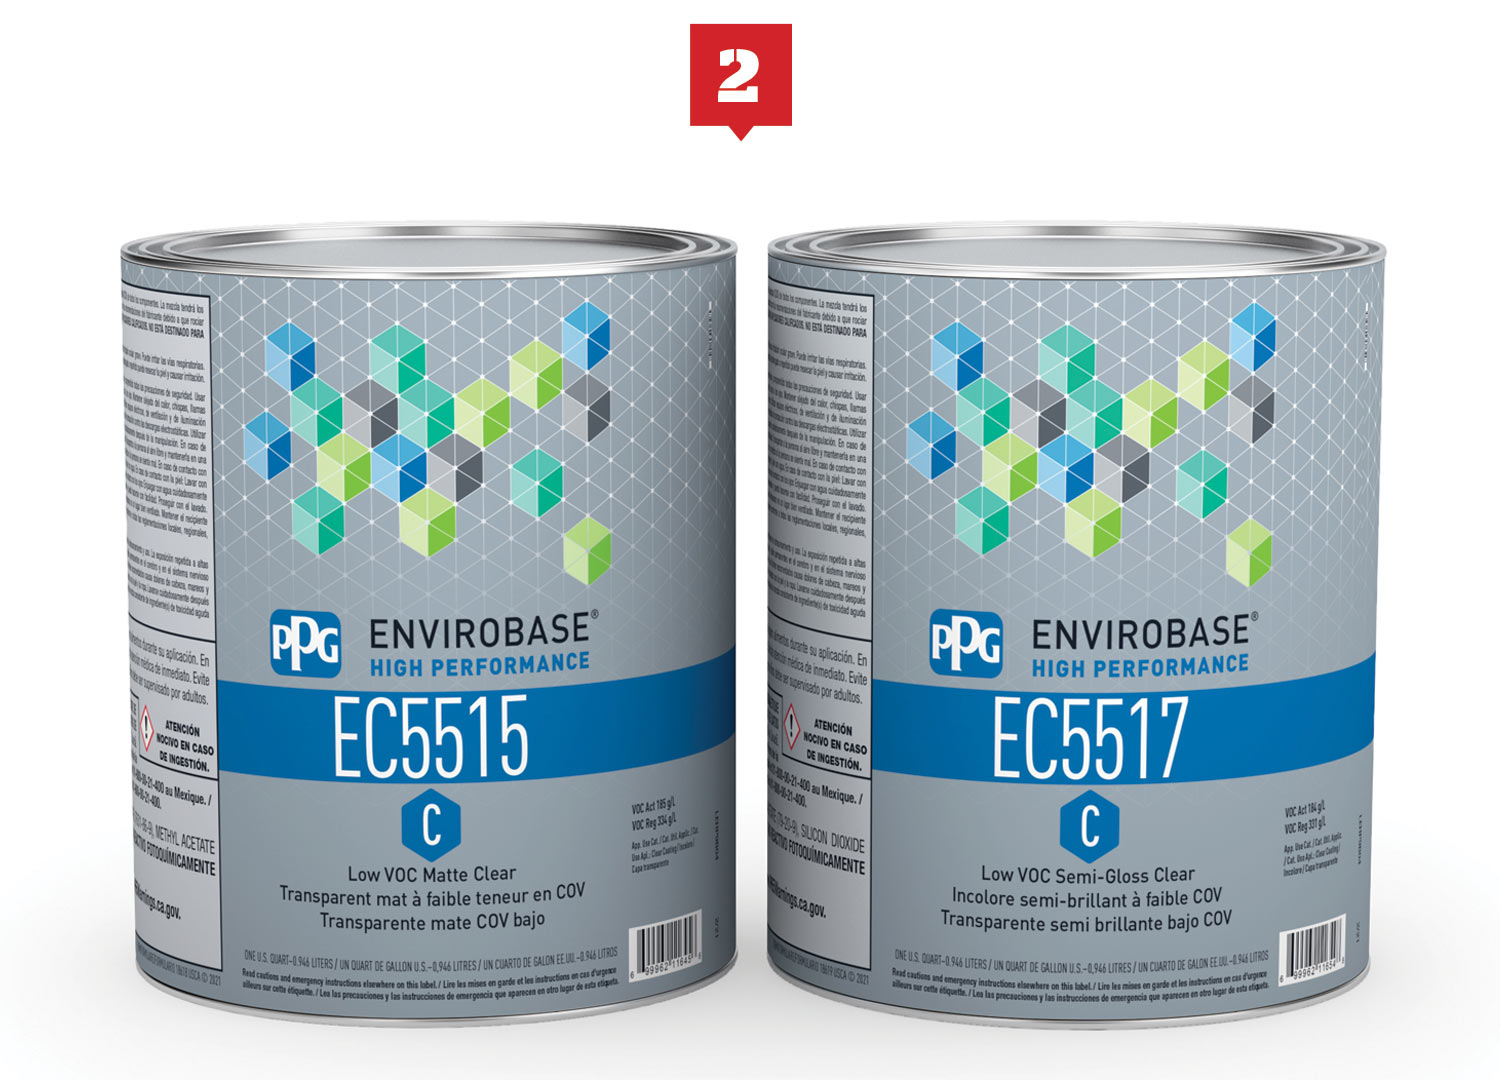 cans of PPG's 2.1 Low VOC Matte and Semi-Gloss Clearcoats